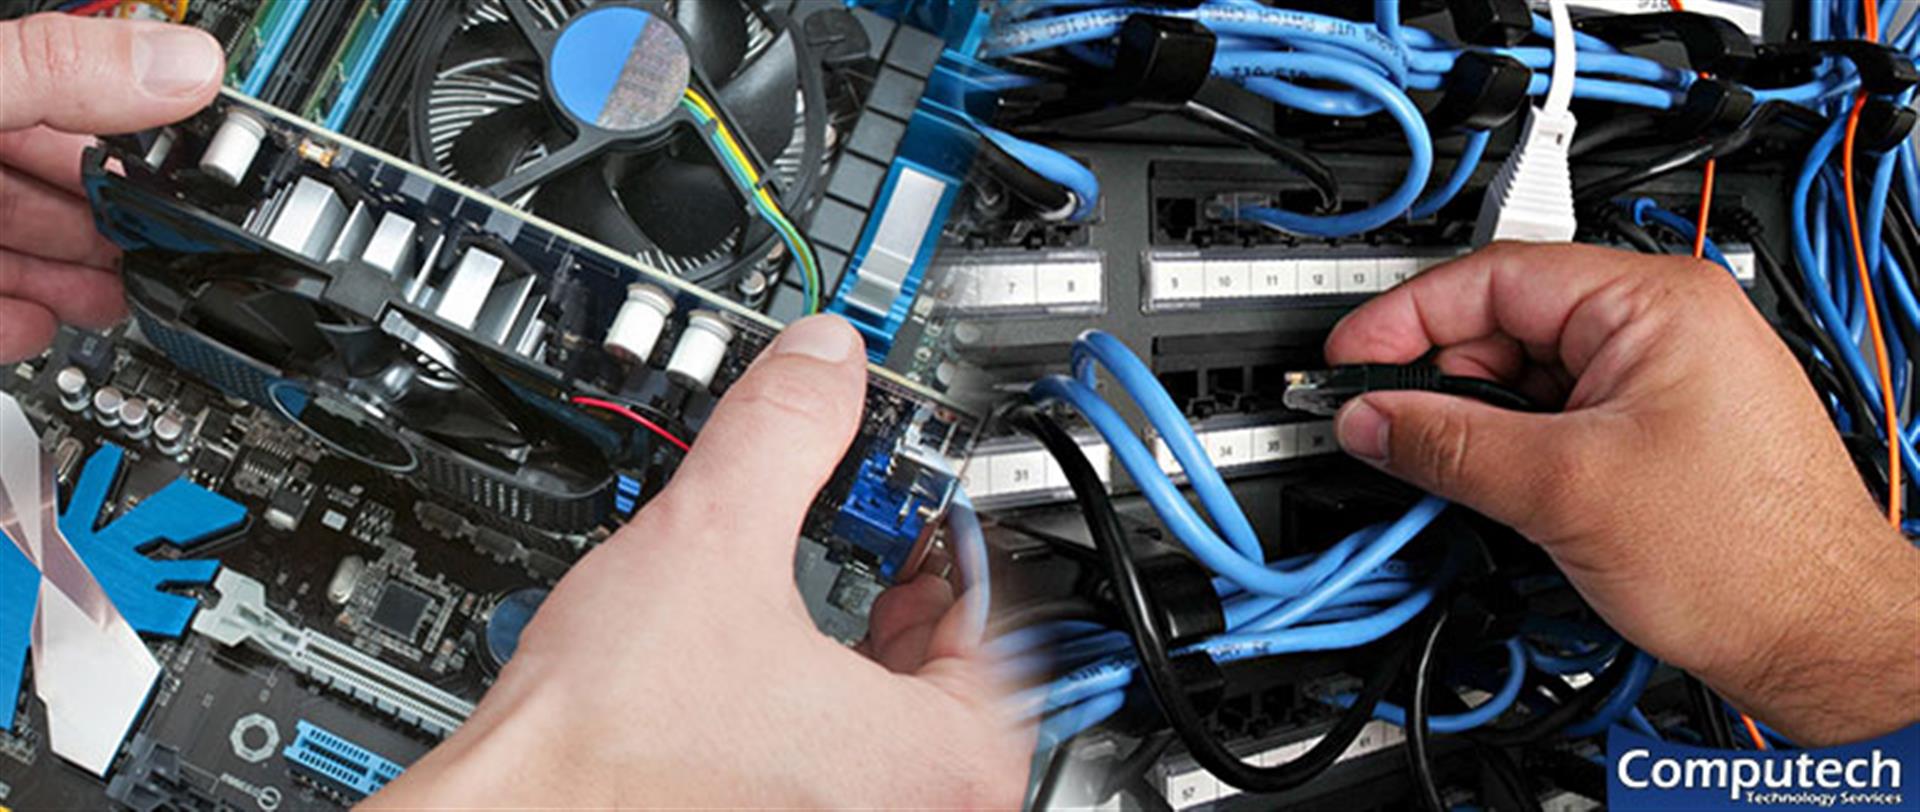 Hapeville Georgia Onsite Computer & Printer Repairs, Networking, Voice & Data Cabling Services